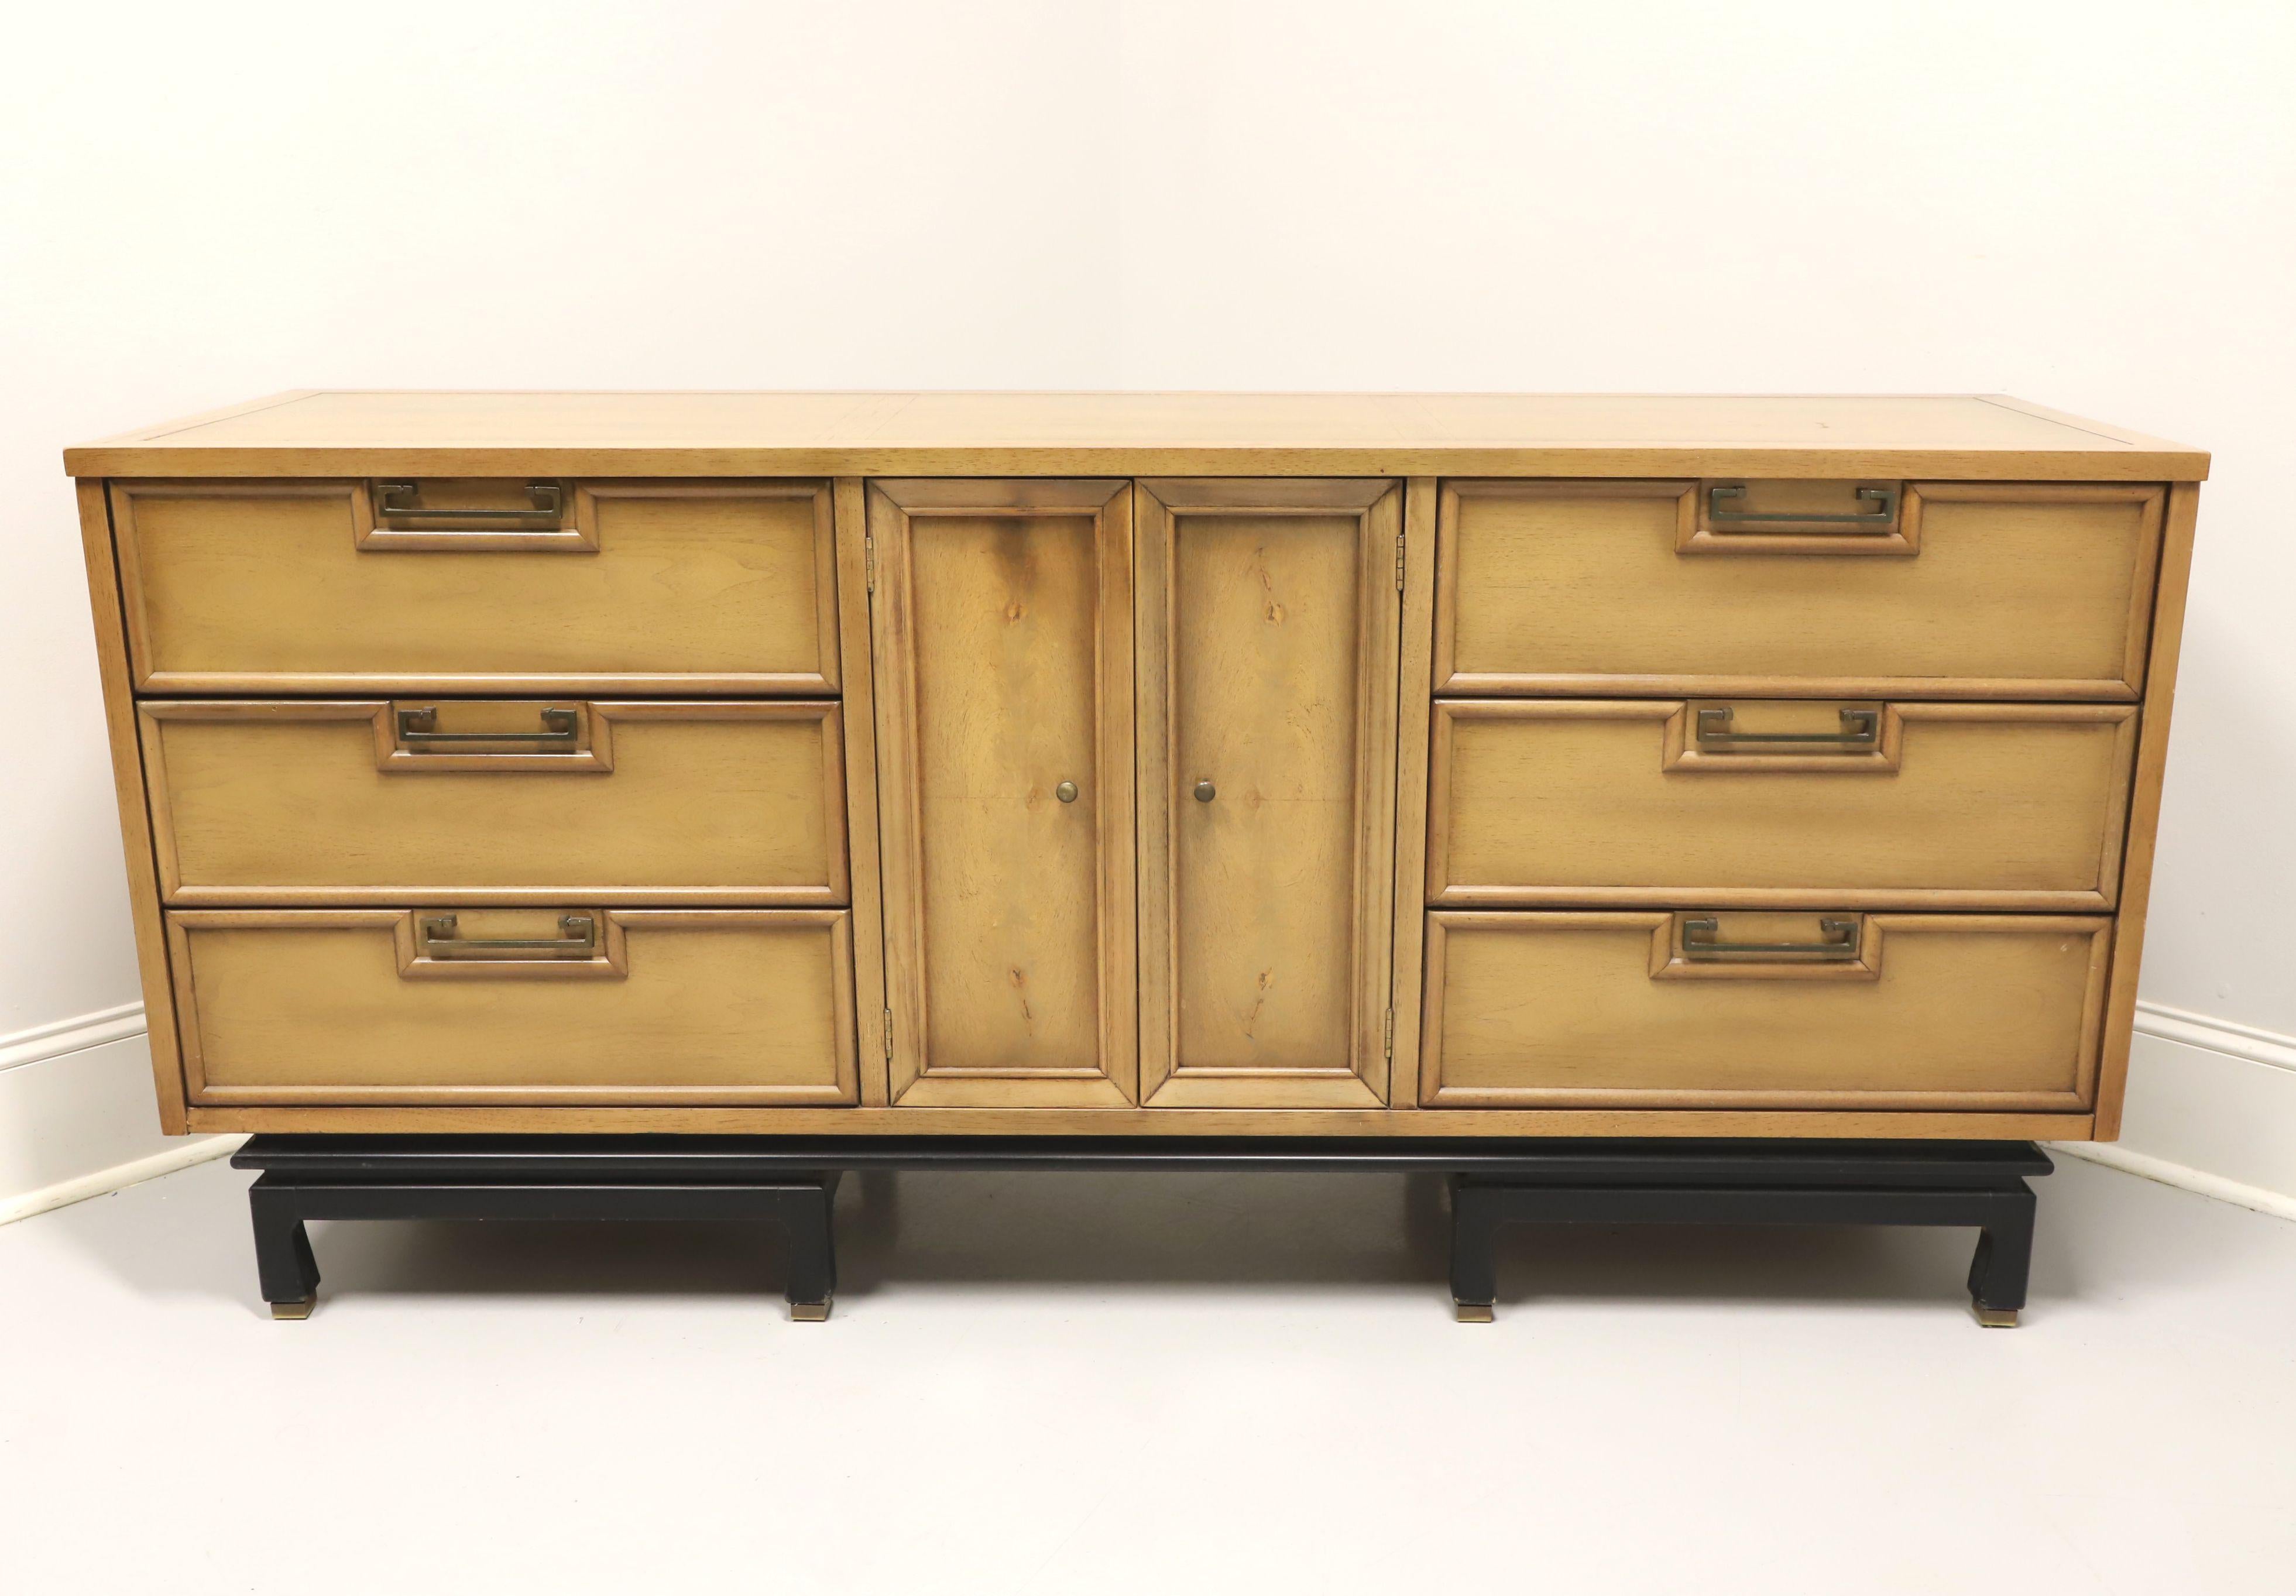 An Asian inspired triple dresser by American of Martinsville. Walnut with a light blonde finish, banded top, brass hardware, black painted slightly raised base on eight legs with base caps. Features a center two door cabinet revealing three smaller